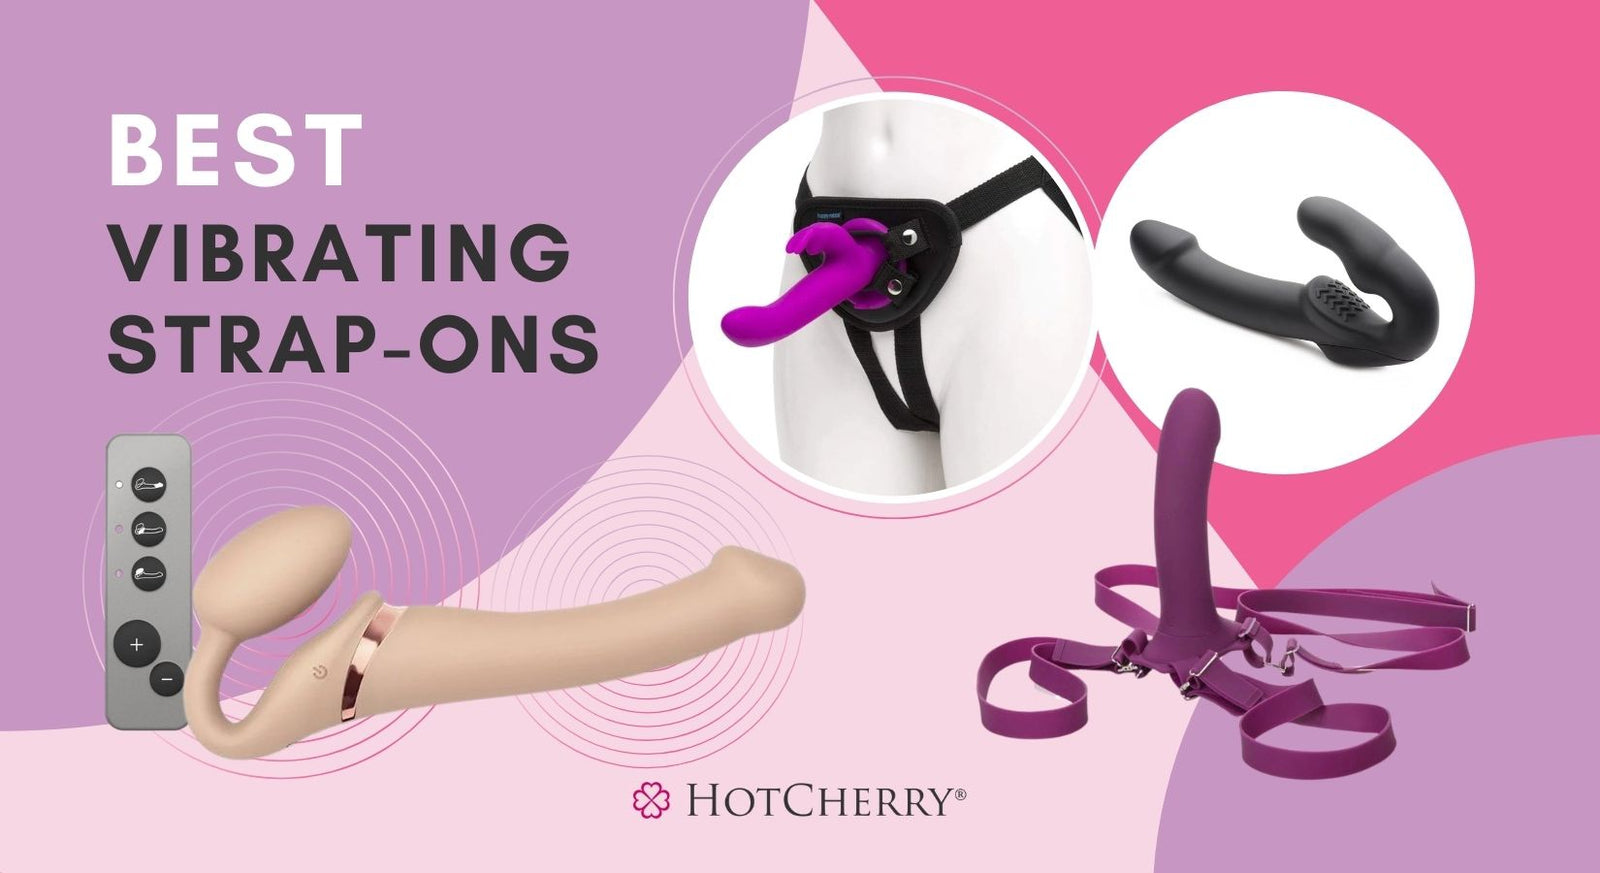 10 Best Vibrating Strap-Ons Reviewed